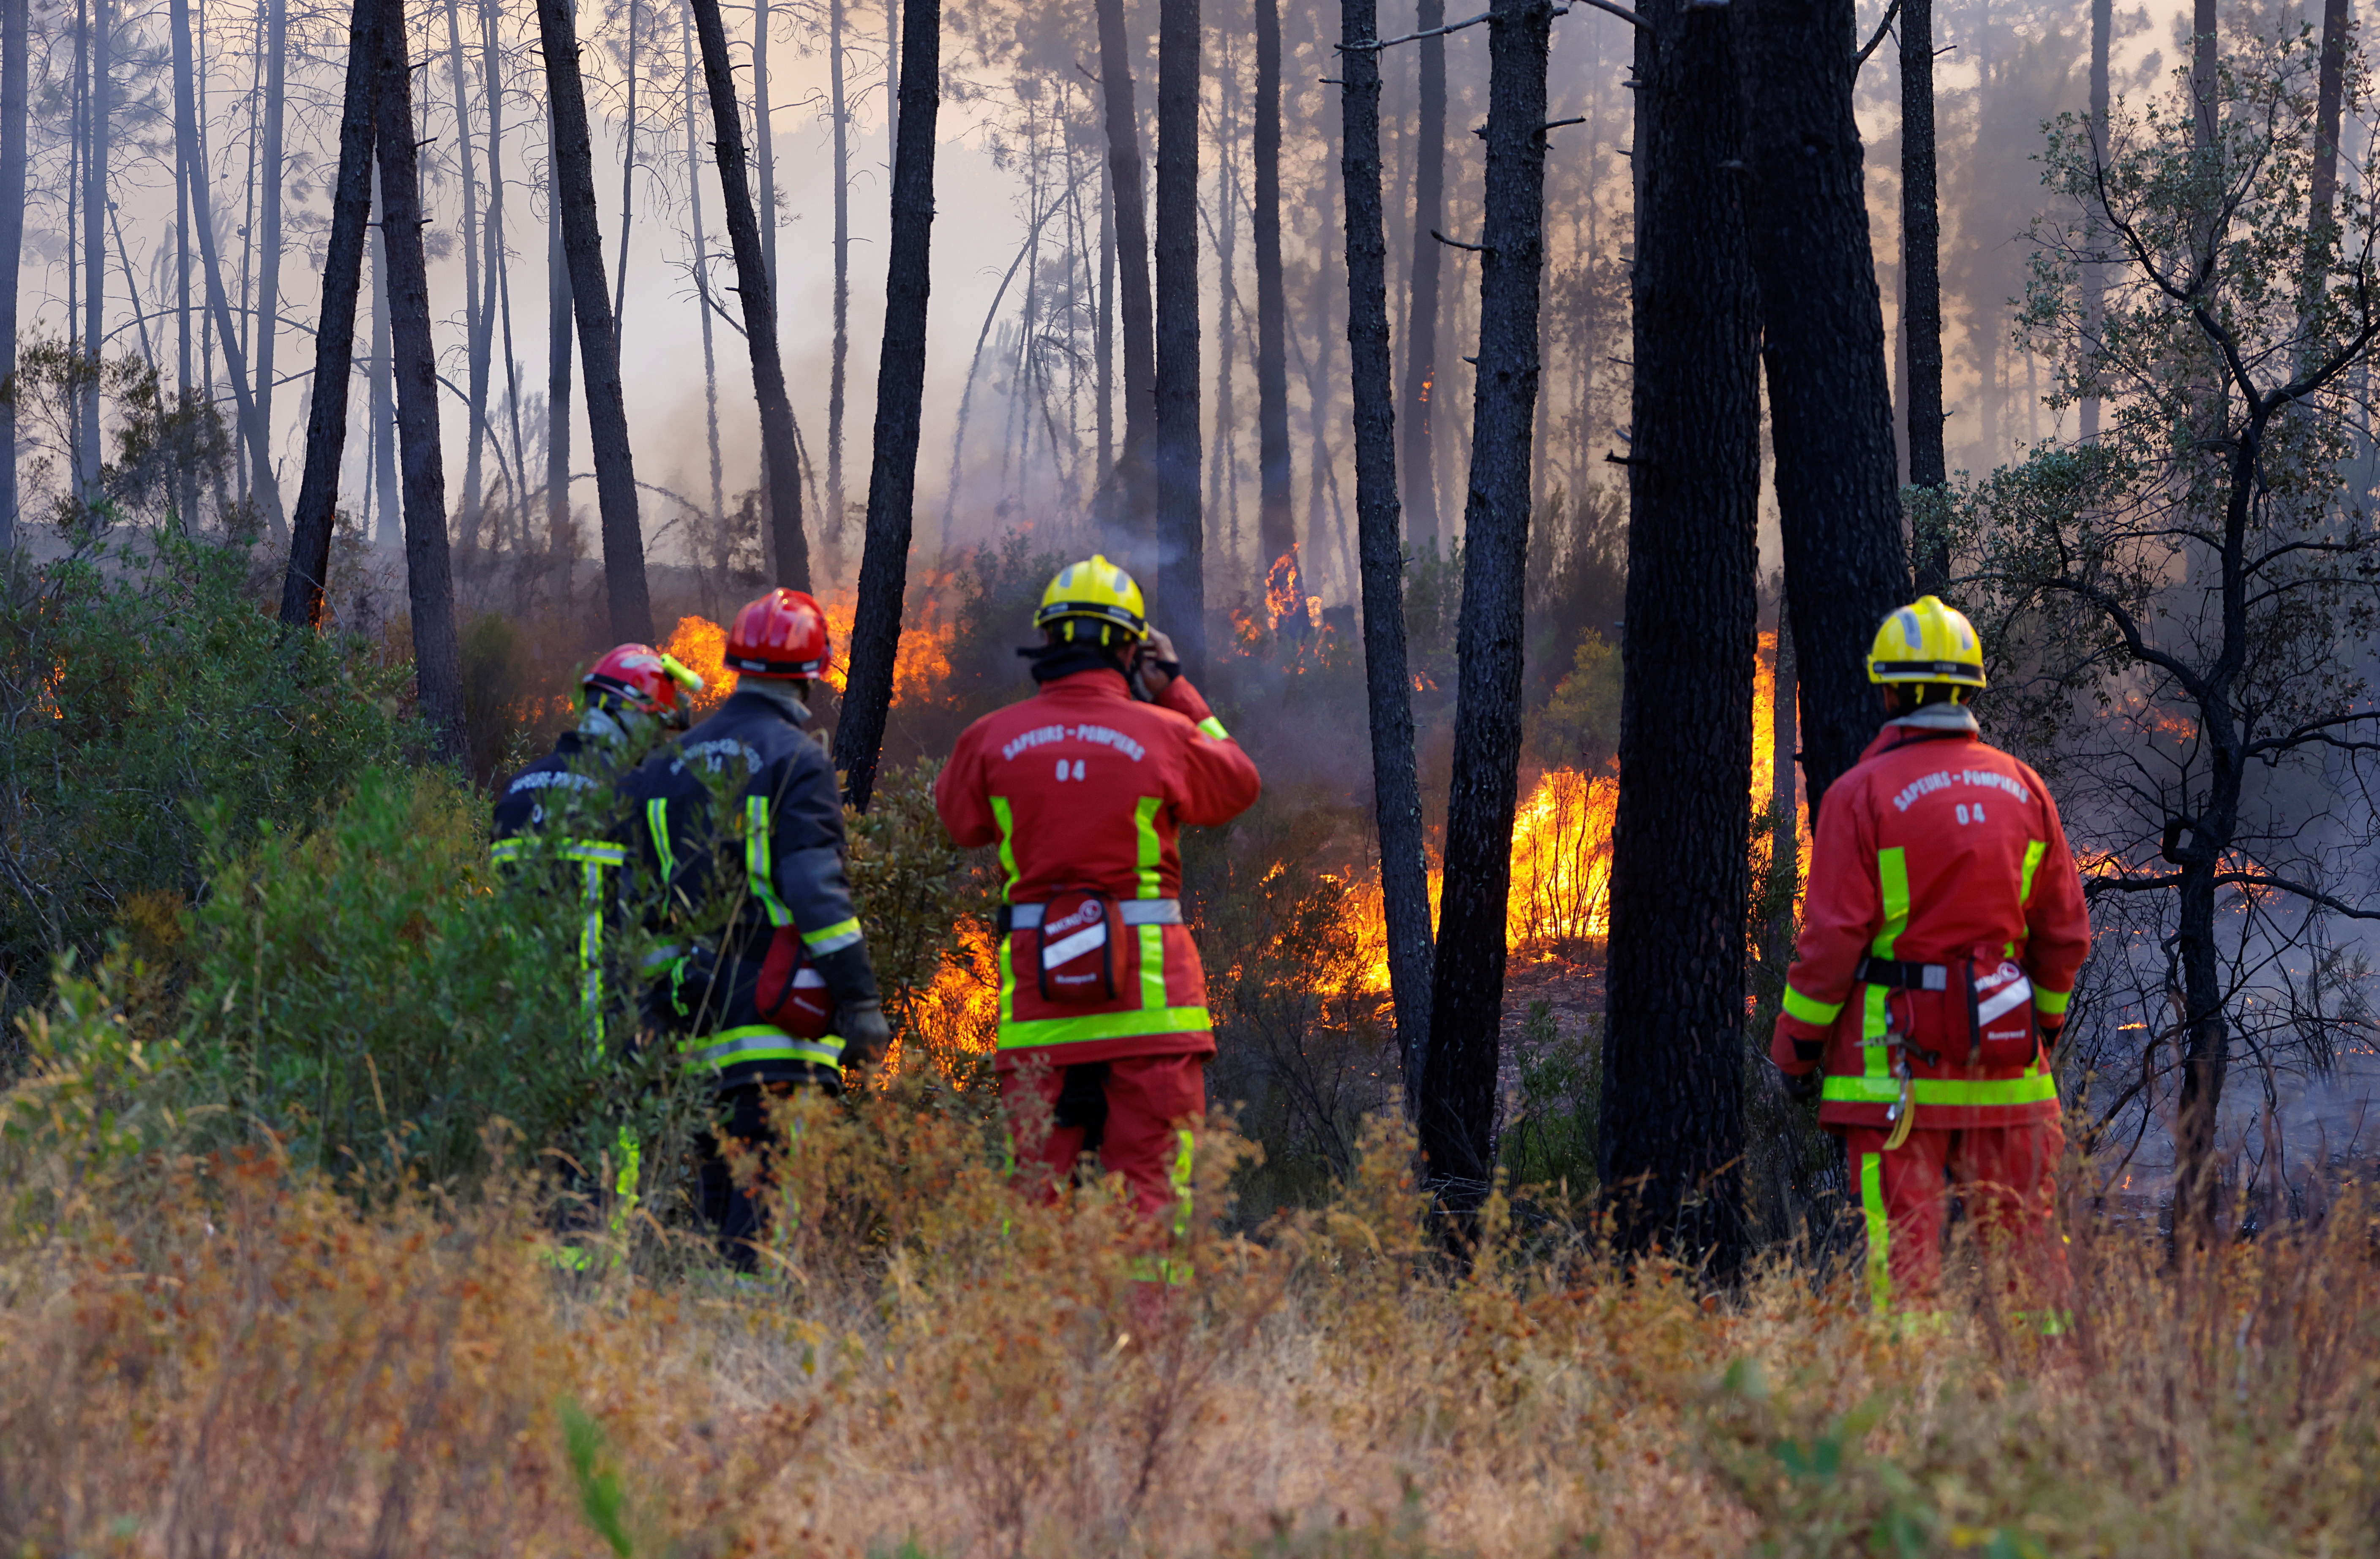 Firefighters work during a major wildfire that broke out in Vidauban, in the region of southern France, August 18, 2021. REUTERS/Eric Gaillard